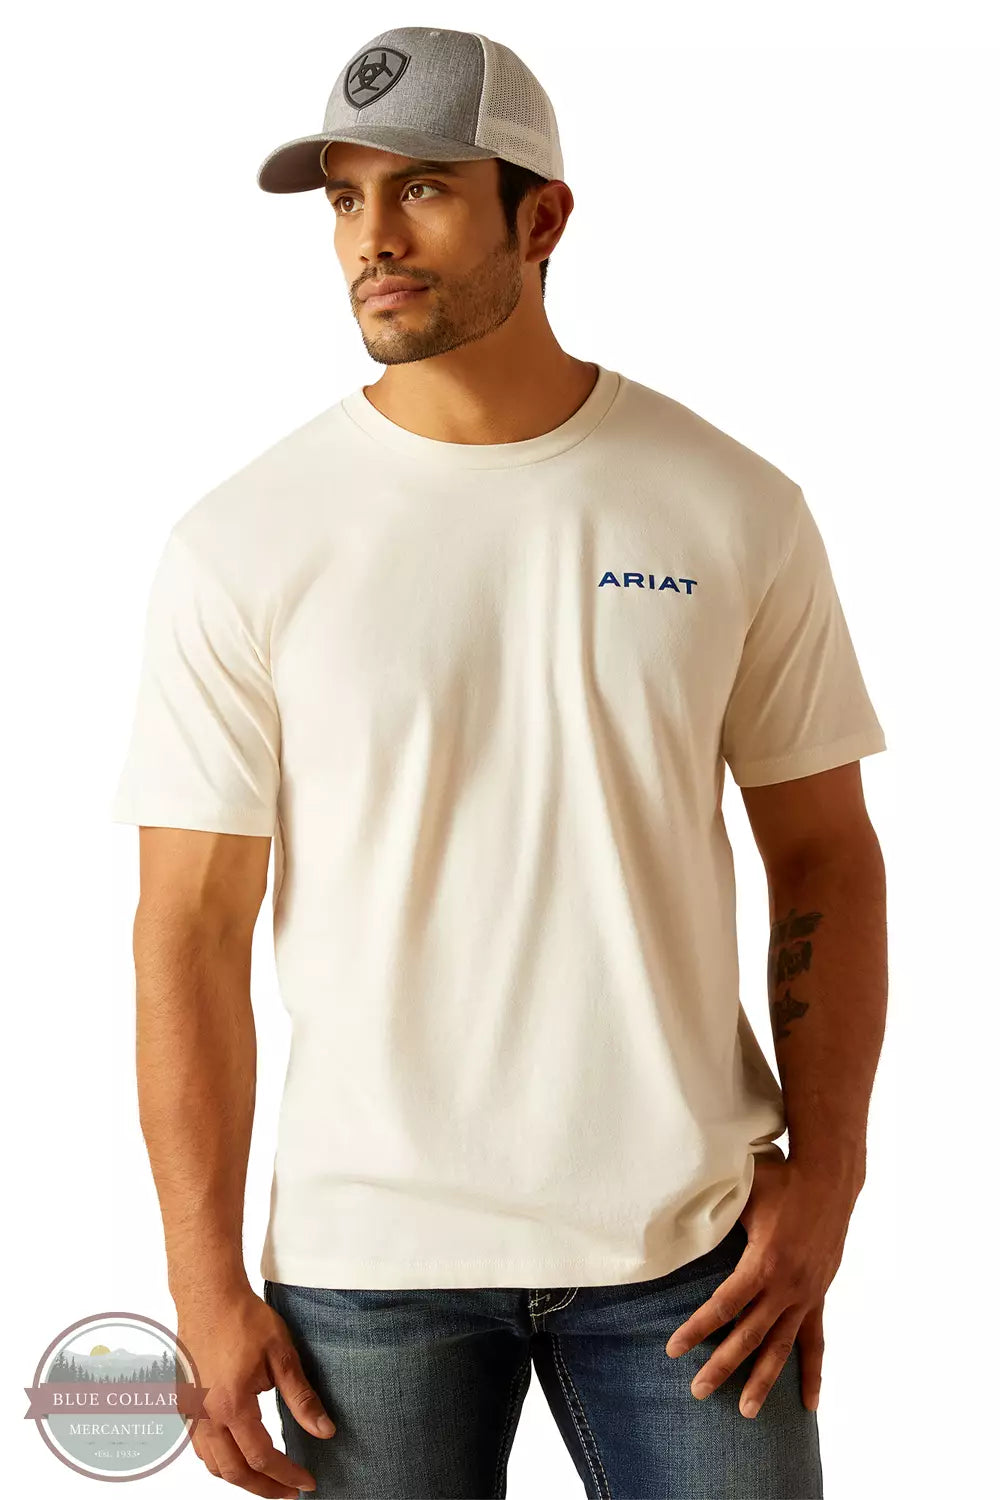 Ariat 10051454 Ariat Logo T-Shirt in Off White Front View